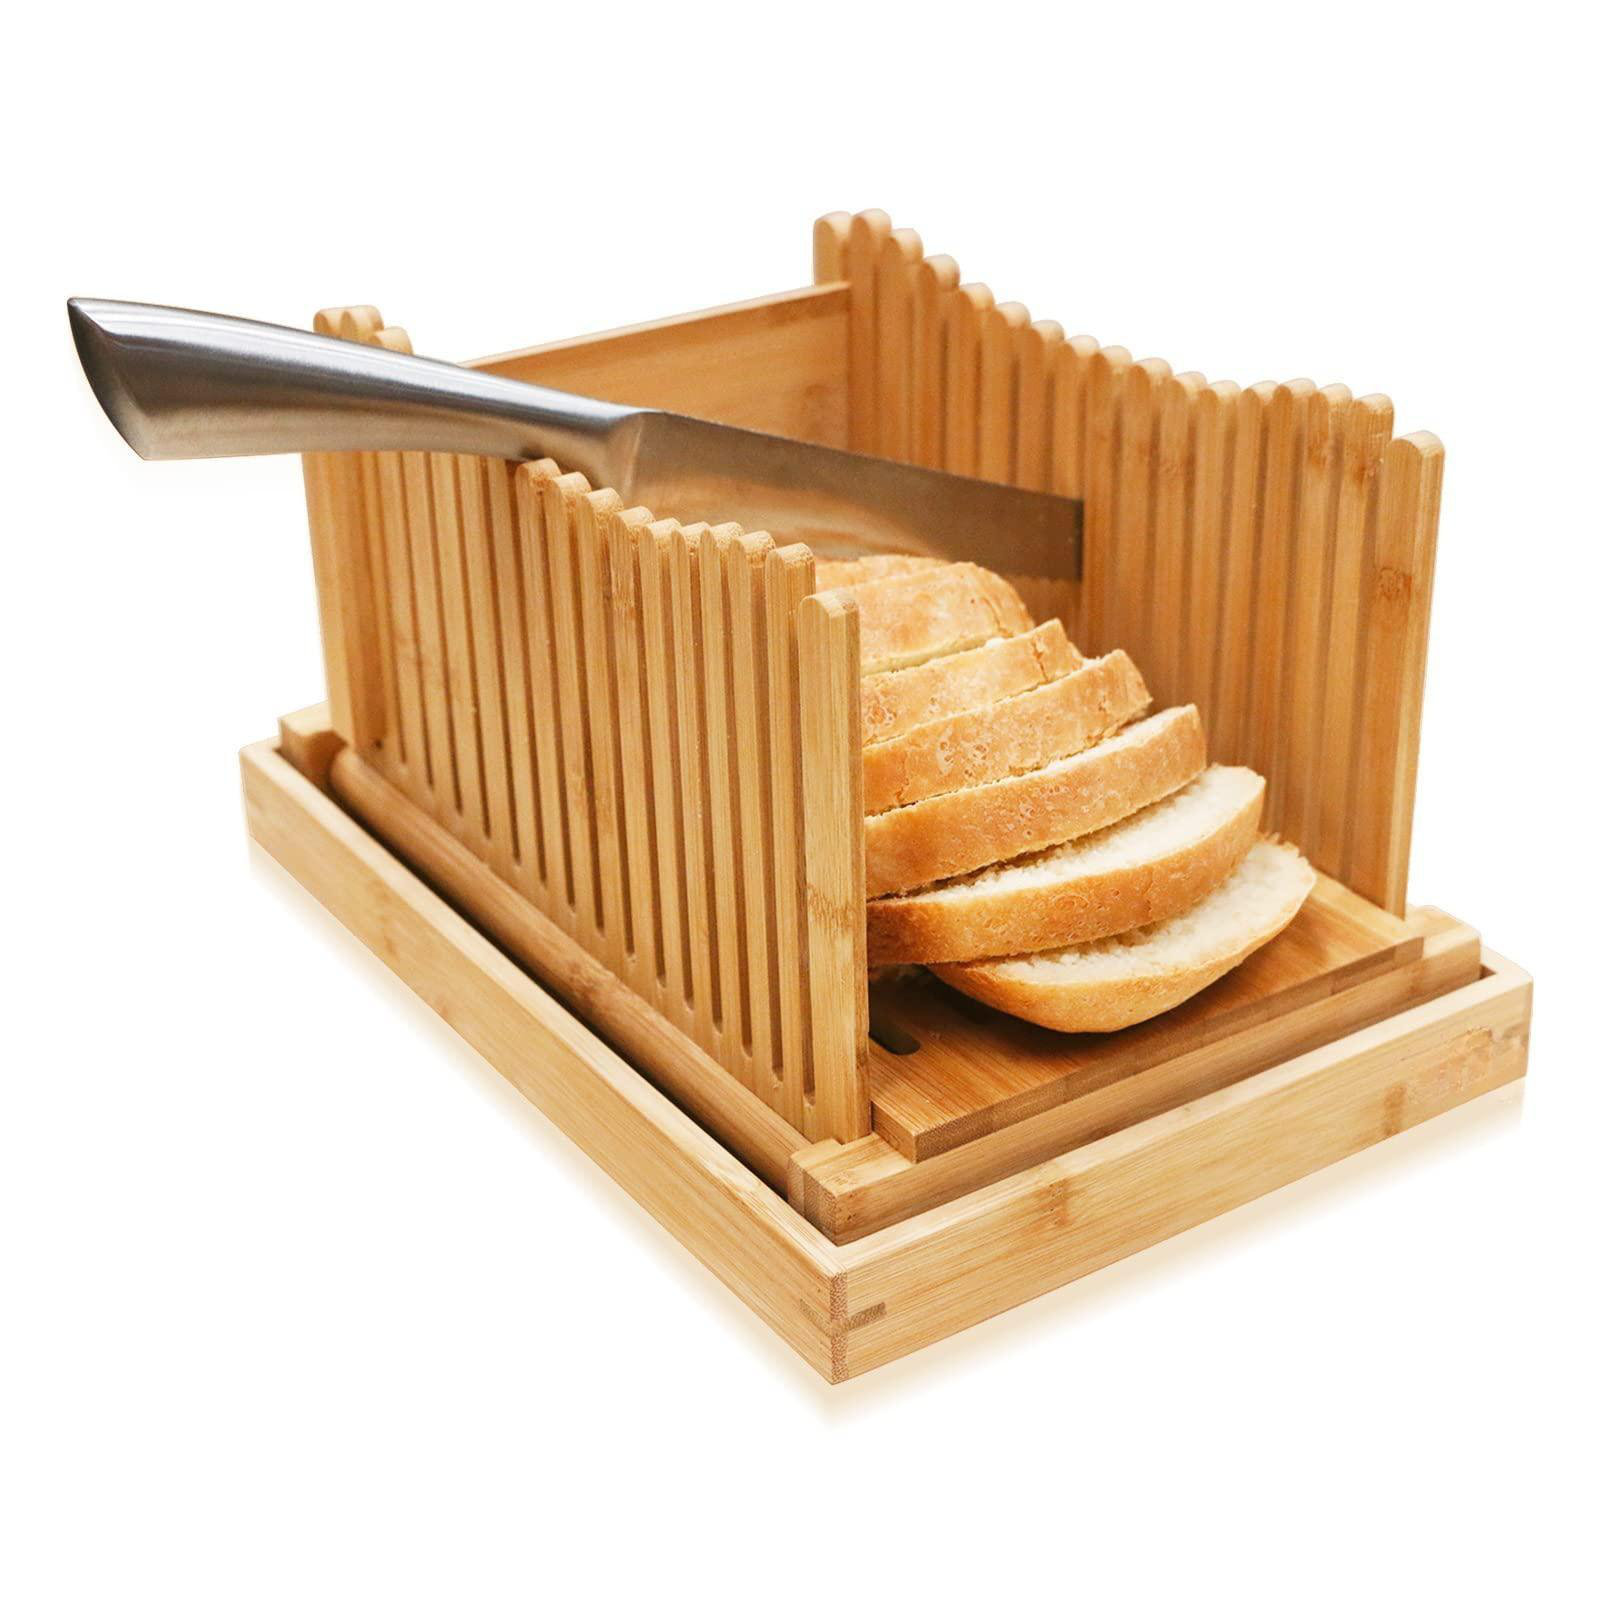 Bamboo Bread Slicer Cutting Guide - Foldable and Compact with